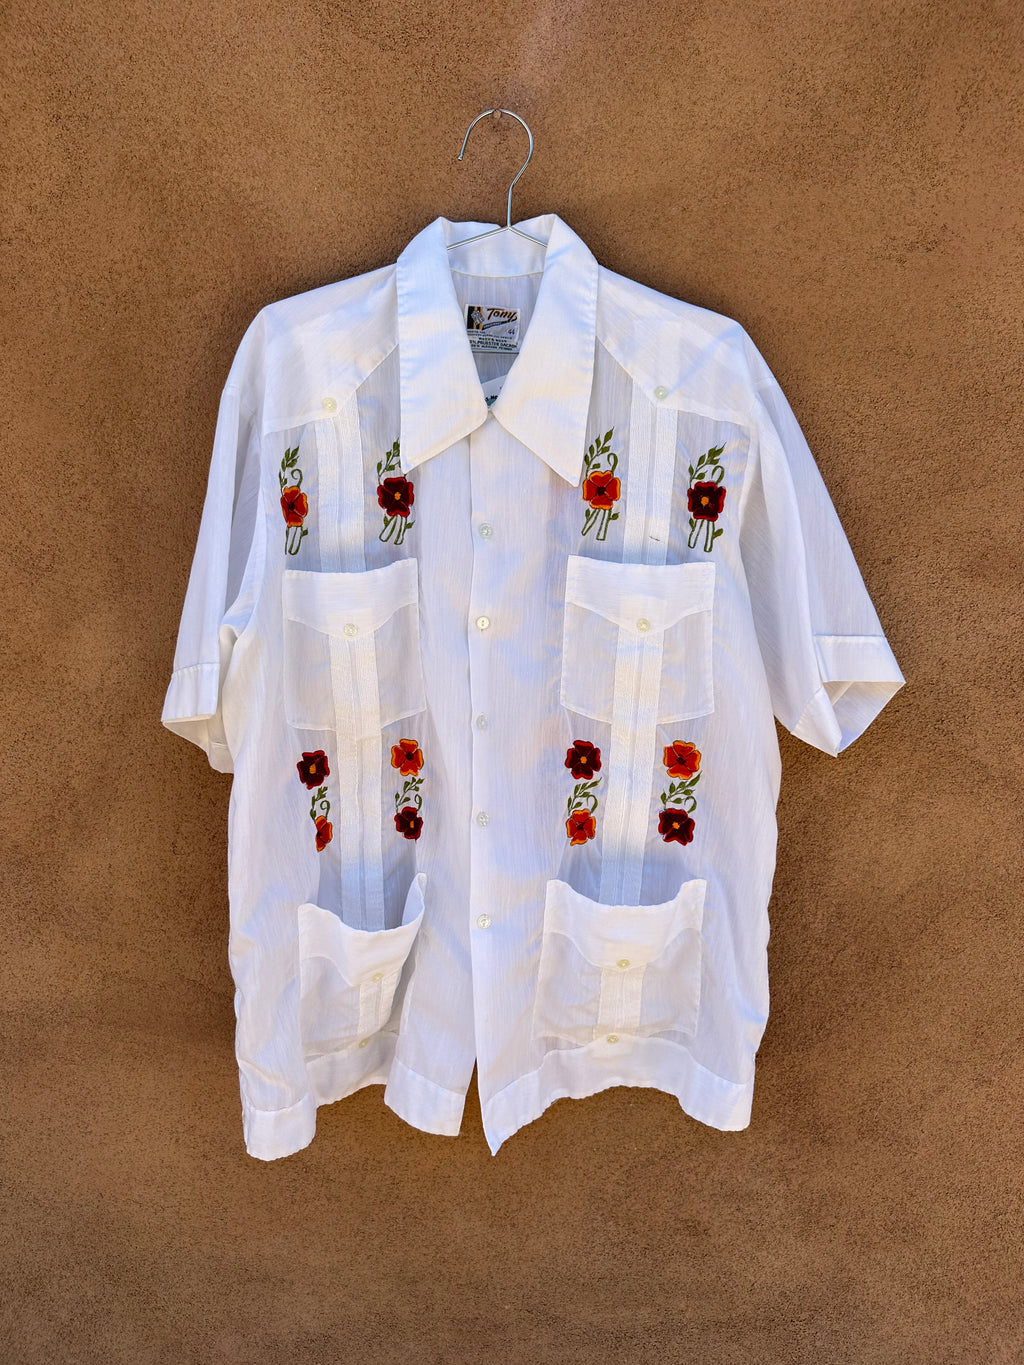 1970s Vintage White Embroidered Floral Guayabera S/S Shirt Pockets